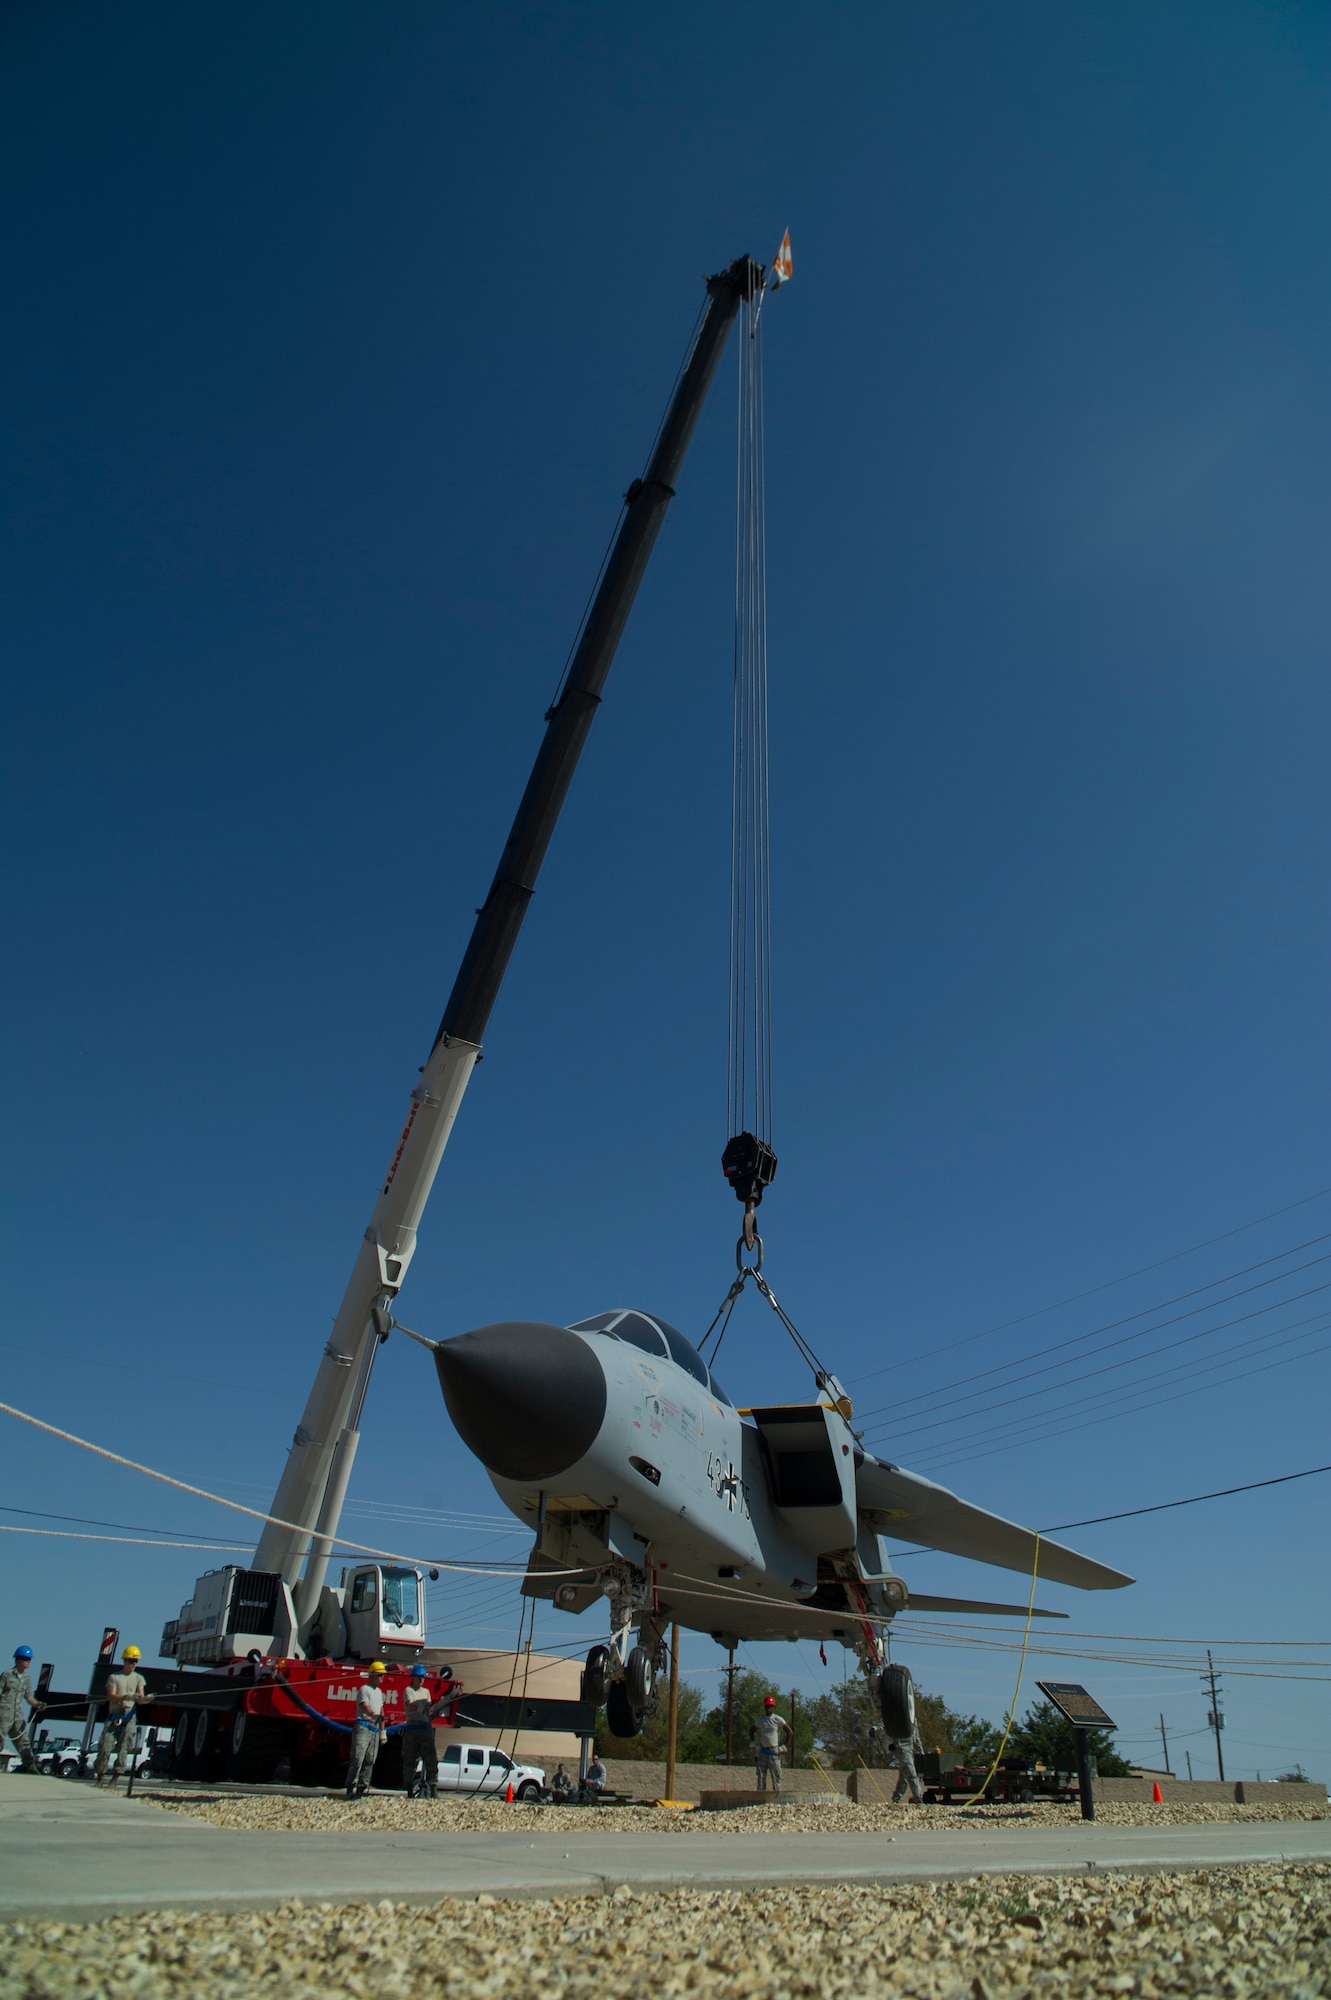 Members of the 49th Maintenance Group crash recovery team hoist a German Air Force Tornado onto it’s final resting place at Heritage Park among other historical aircraft that have been flown at Holloman Air Force Base, N.M., July 19. History was made Sep. 19, when a German Air Force static aircraft was unveiled in Heritage Park by Lt. Gen. Martin Schellis, GAF Flying Training Center commander, and Col. Robert Kiebler, 49th Wing commander. The GAF Training Center and the Tornados are a significant part of military aviation operations in and around Holloman Air Force Base and the White Sands Missile Range. (U.S. photo by Airman 1st Class Aaron Montoya / Released)